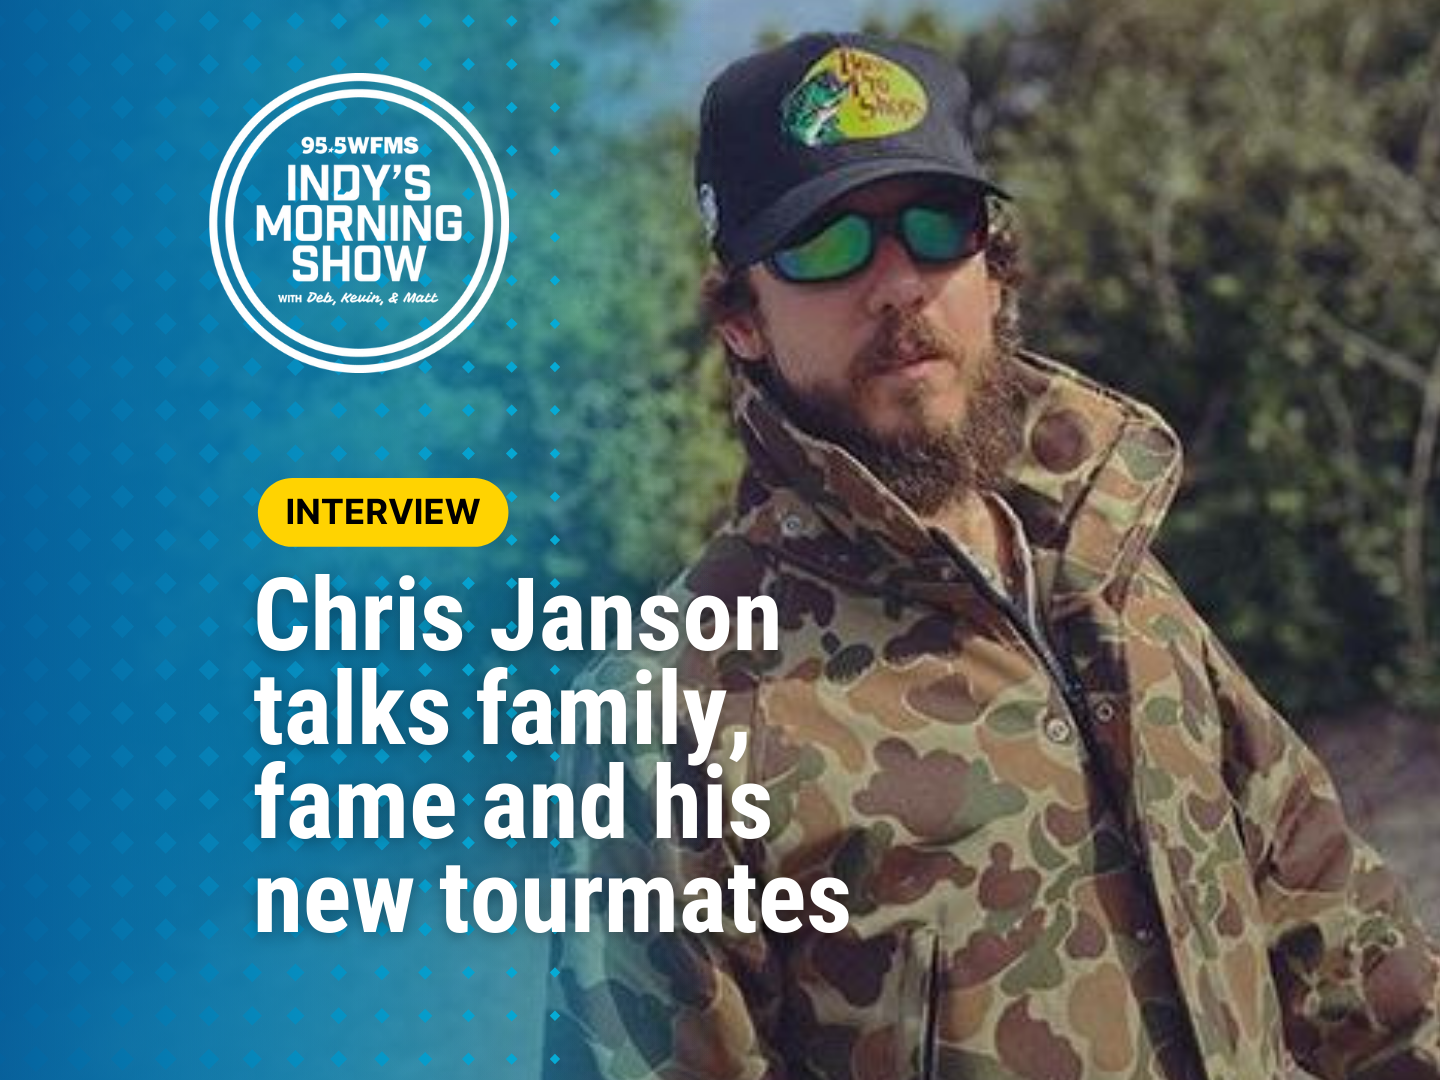 Chris Janson talks about family, fame and Bret Michaels